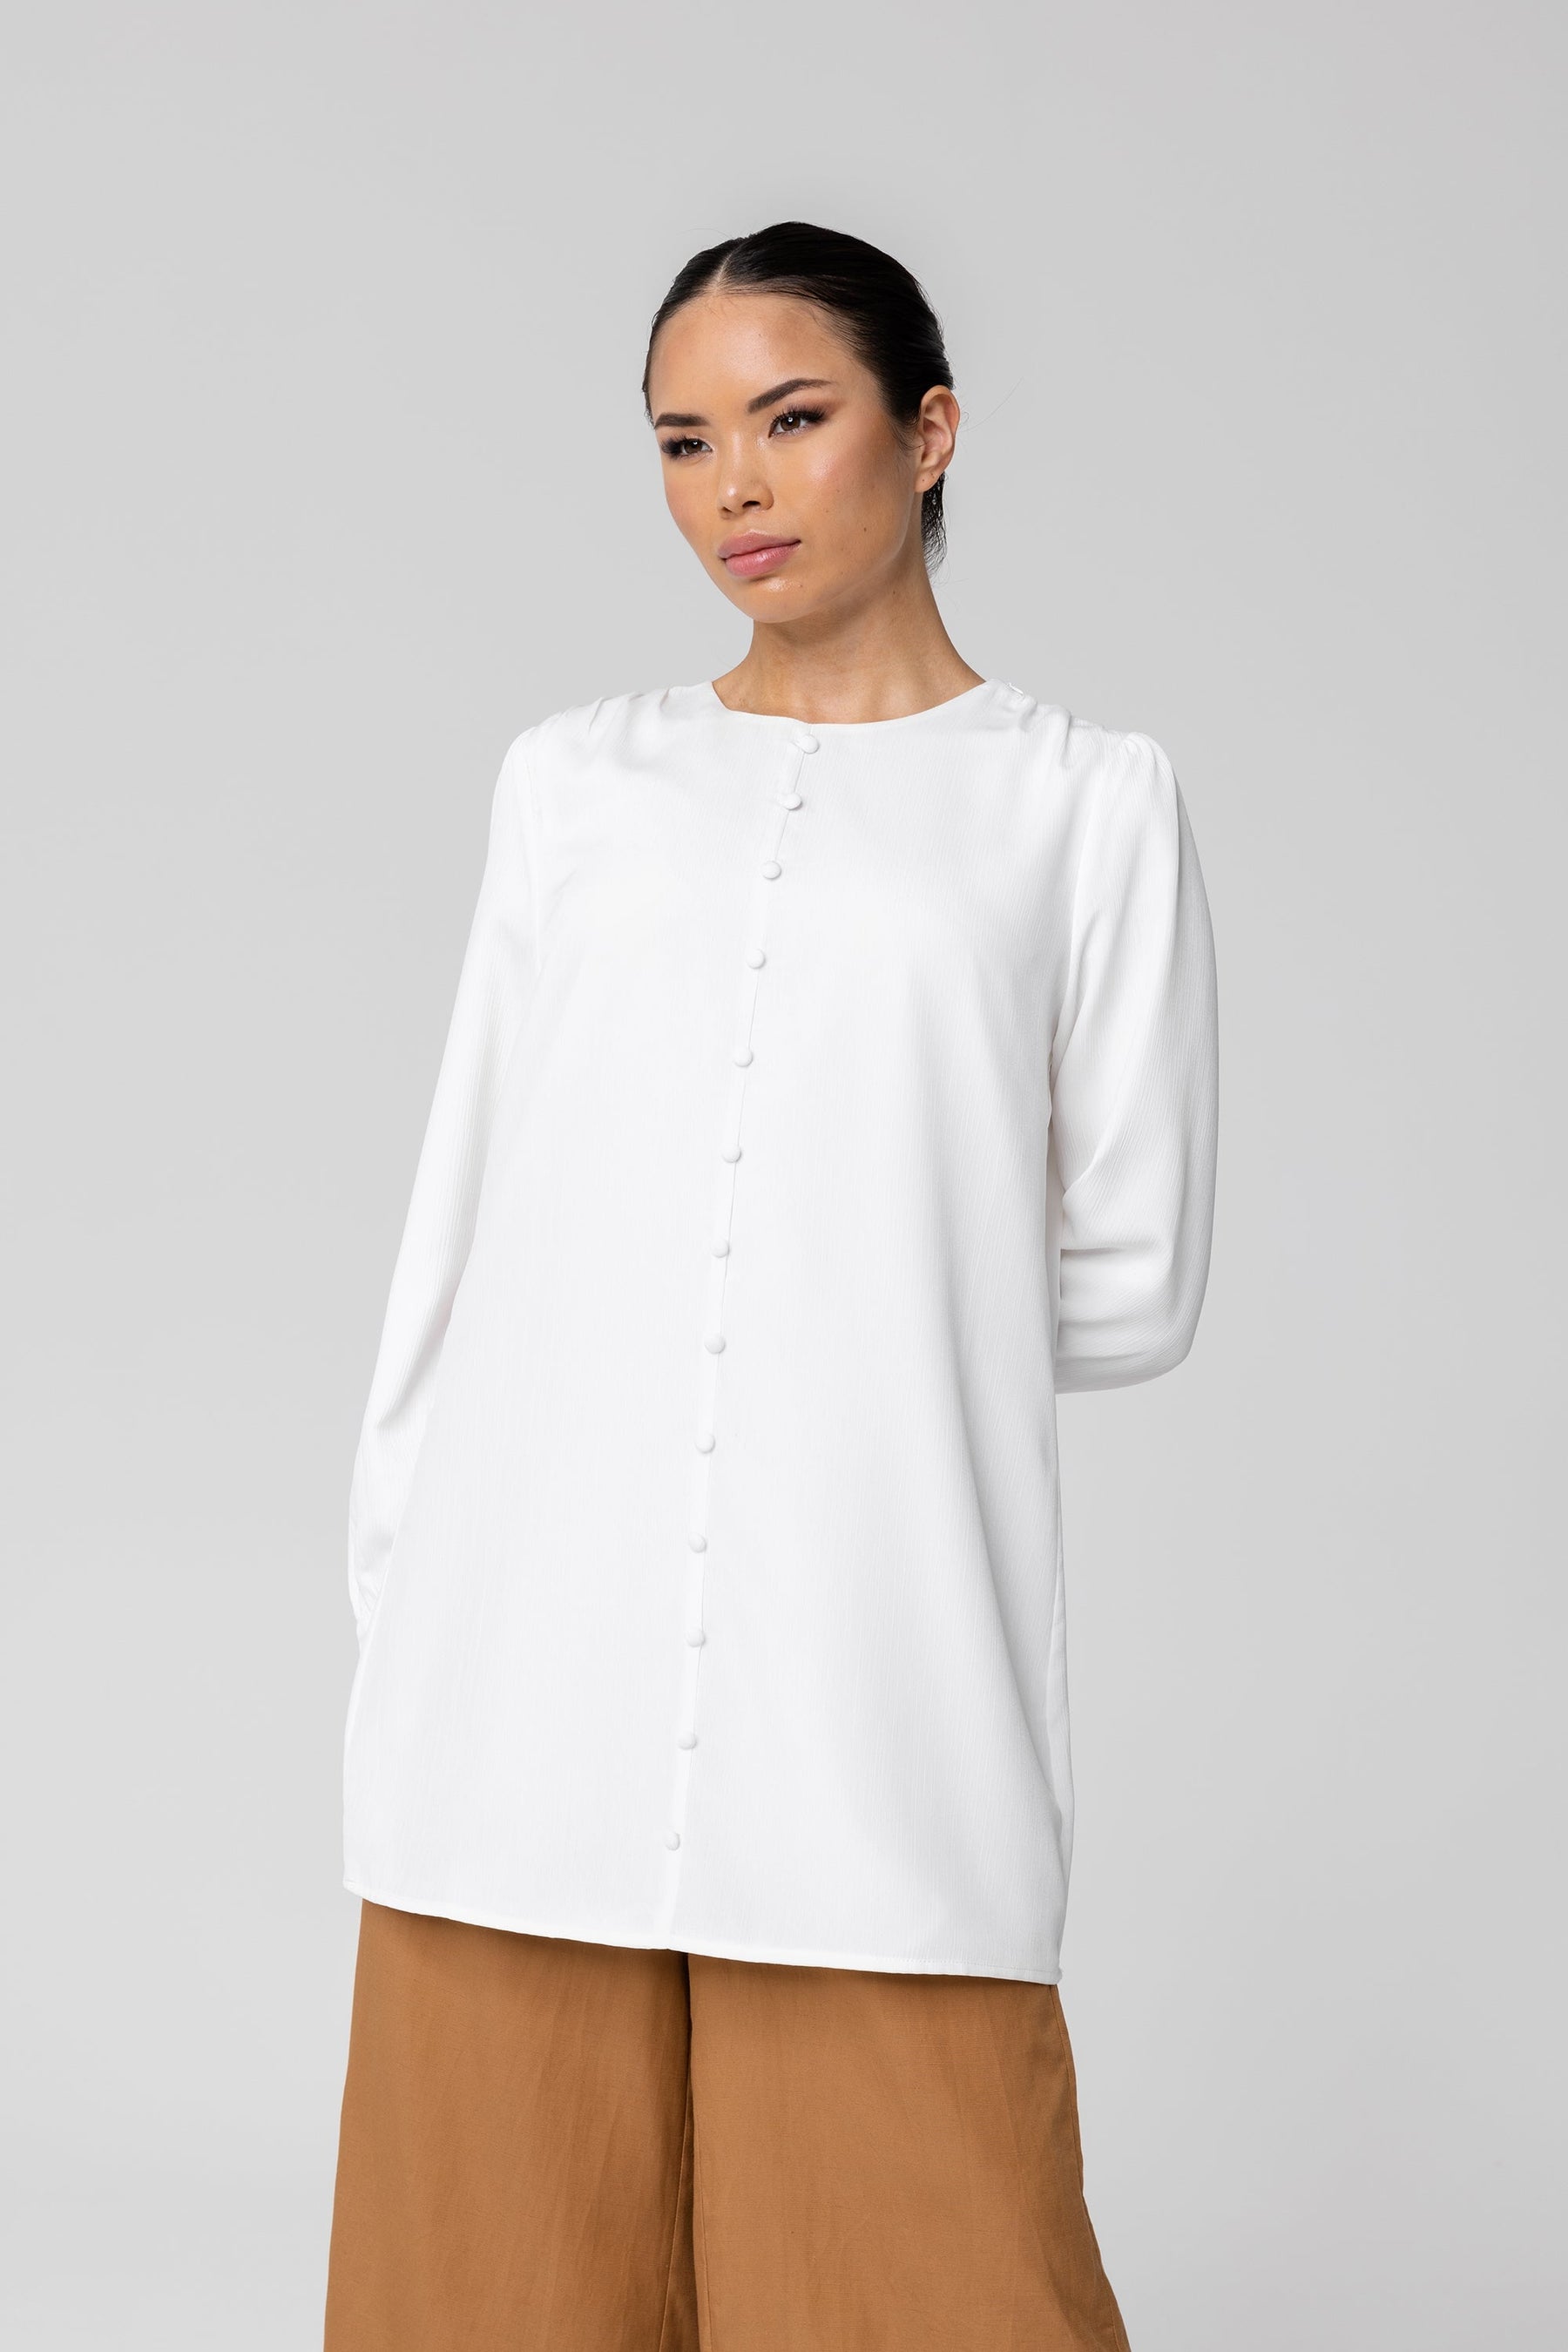 Yuna White Button Front Top epschoolboard 